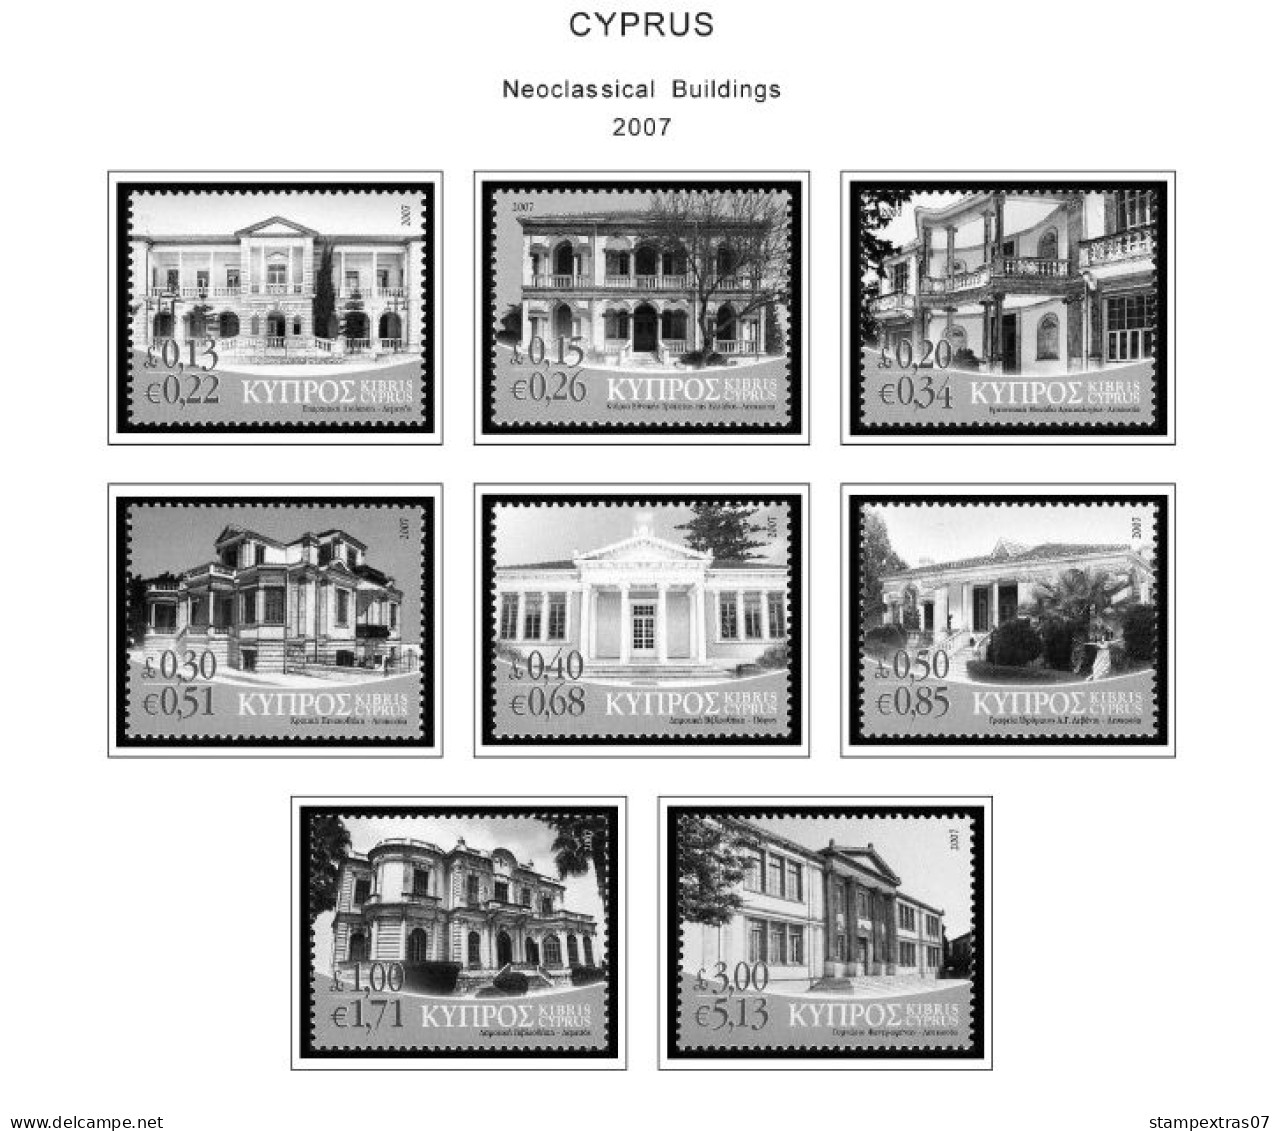 CYPRUS 1880-2010 + 2011-2020 STAMP ALBUM PAGES (177 b&w illustrated pages)